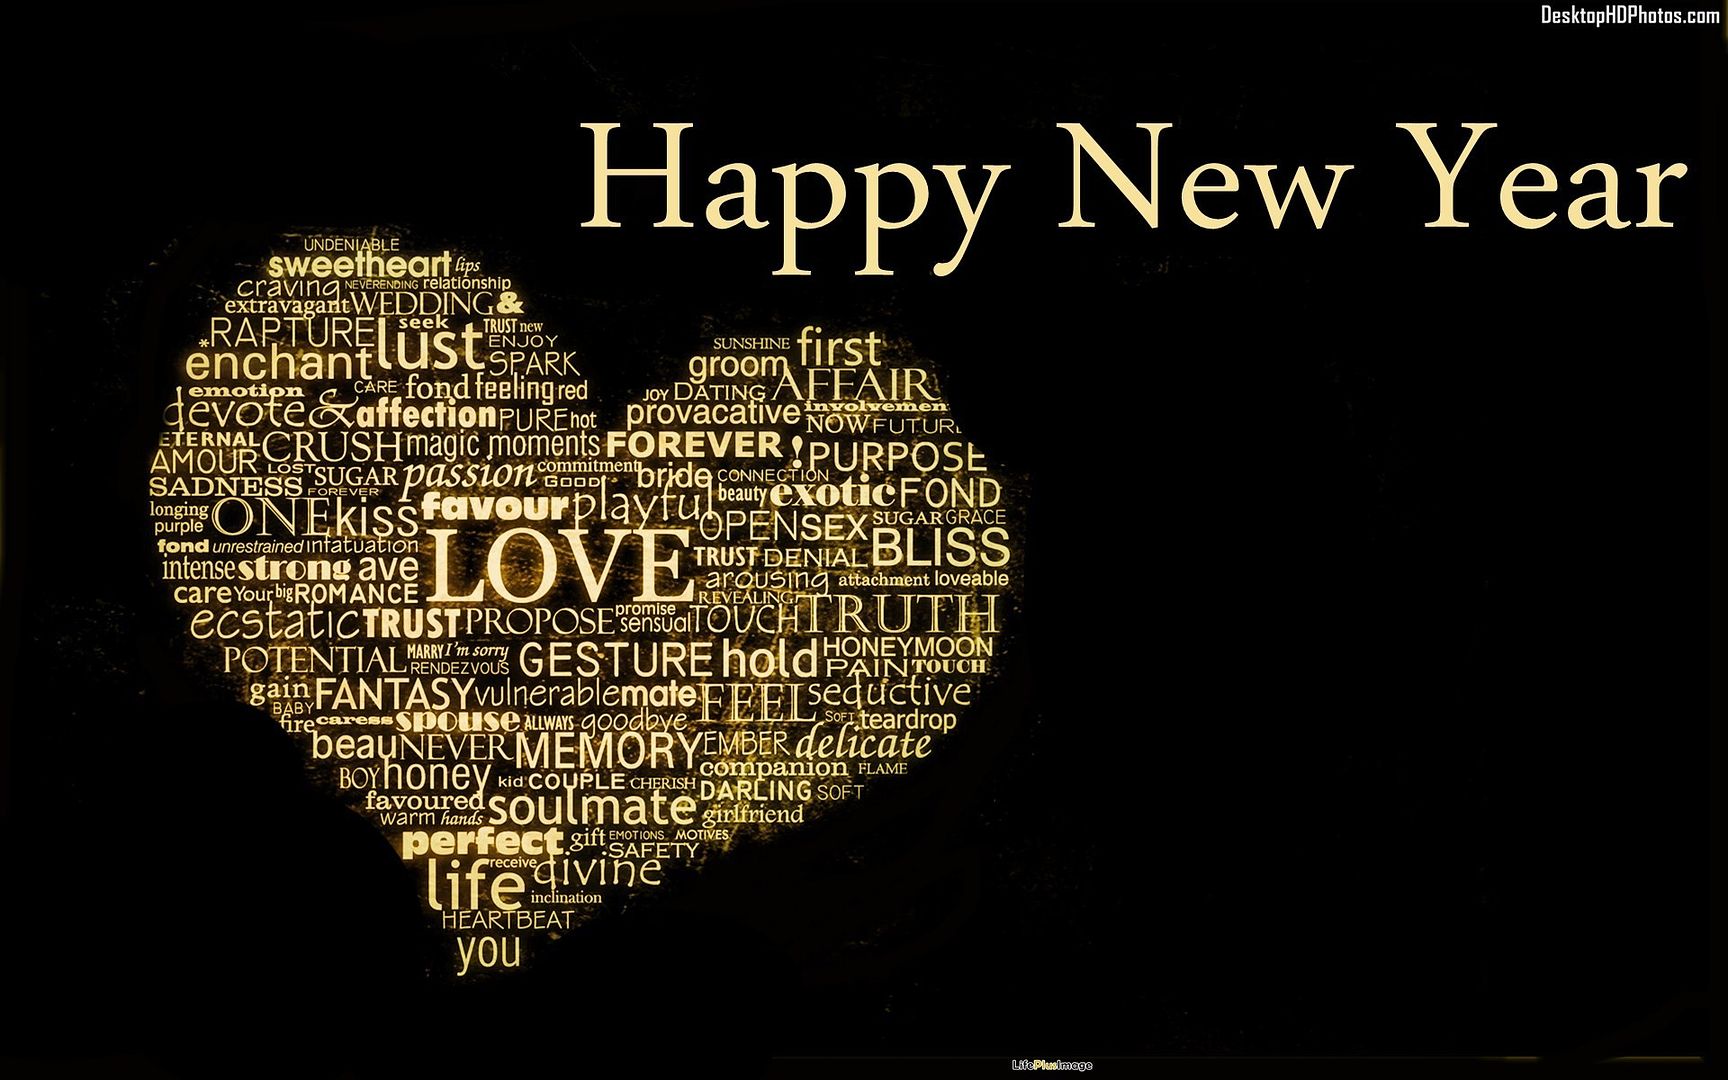  photo happy_new_year_2016_hd_images_with_love_1_gif_56798a2652806.jpg